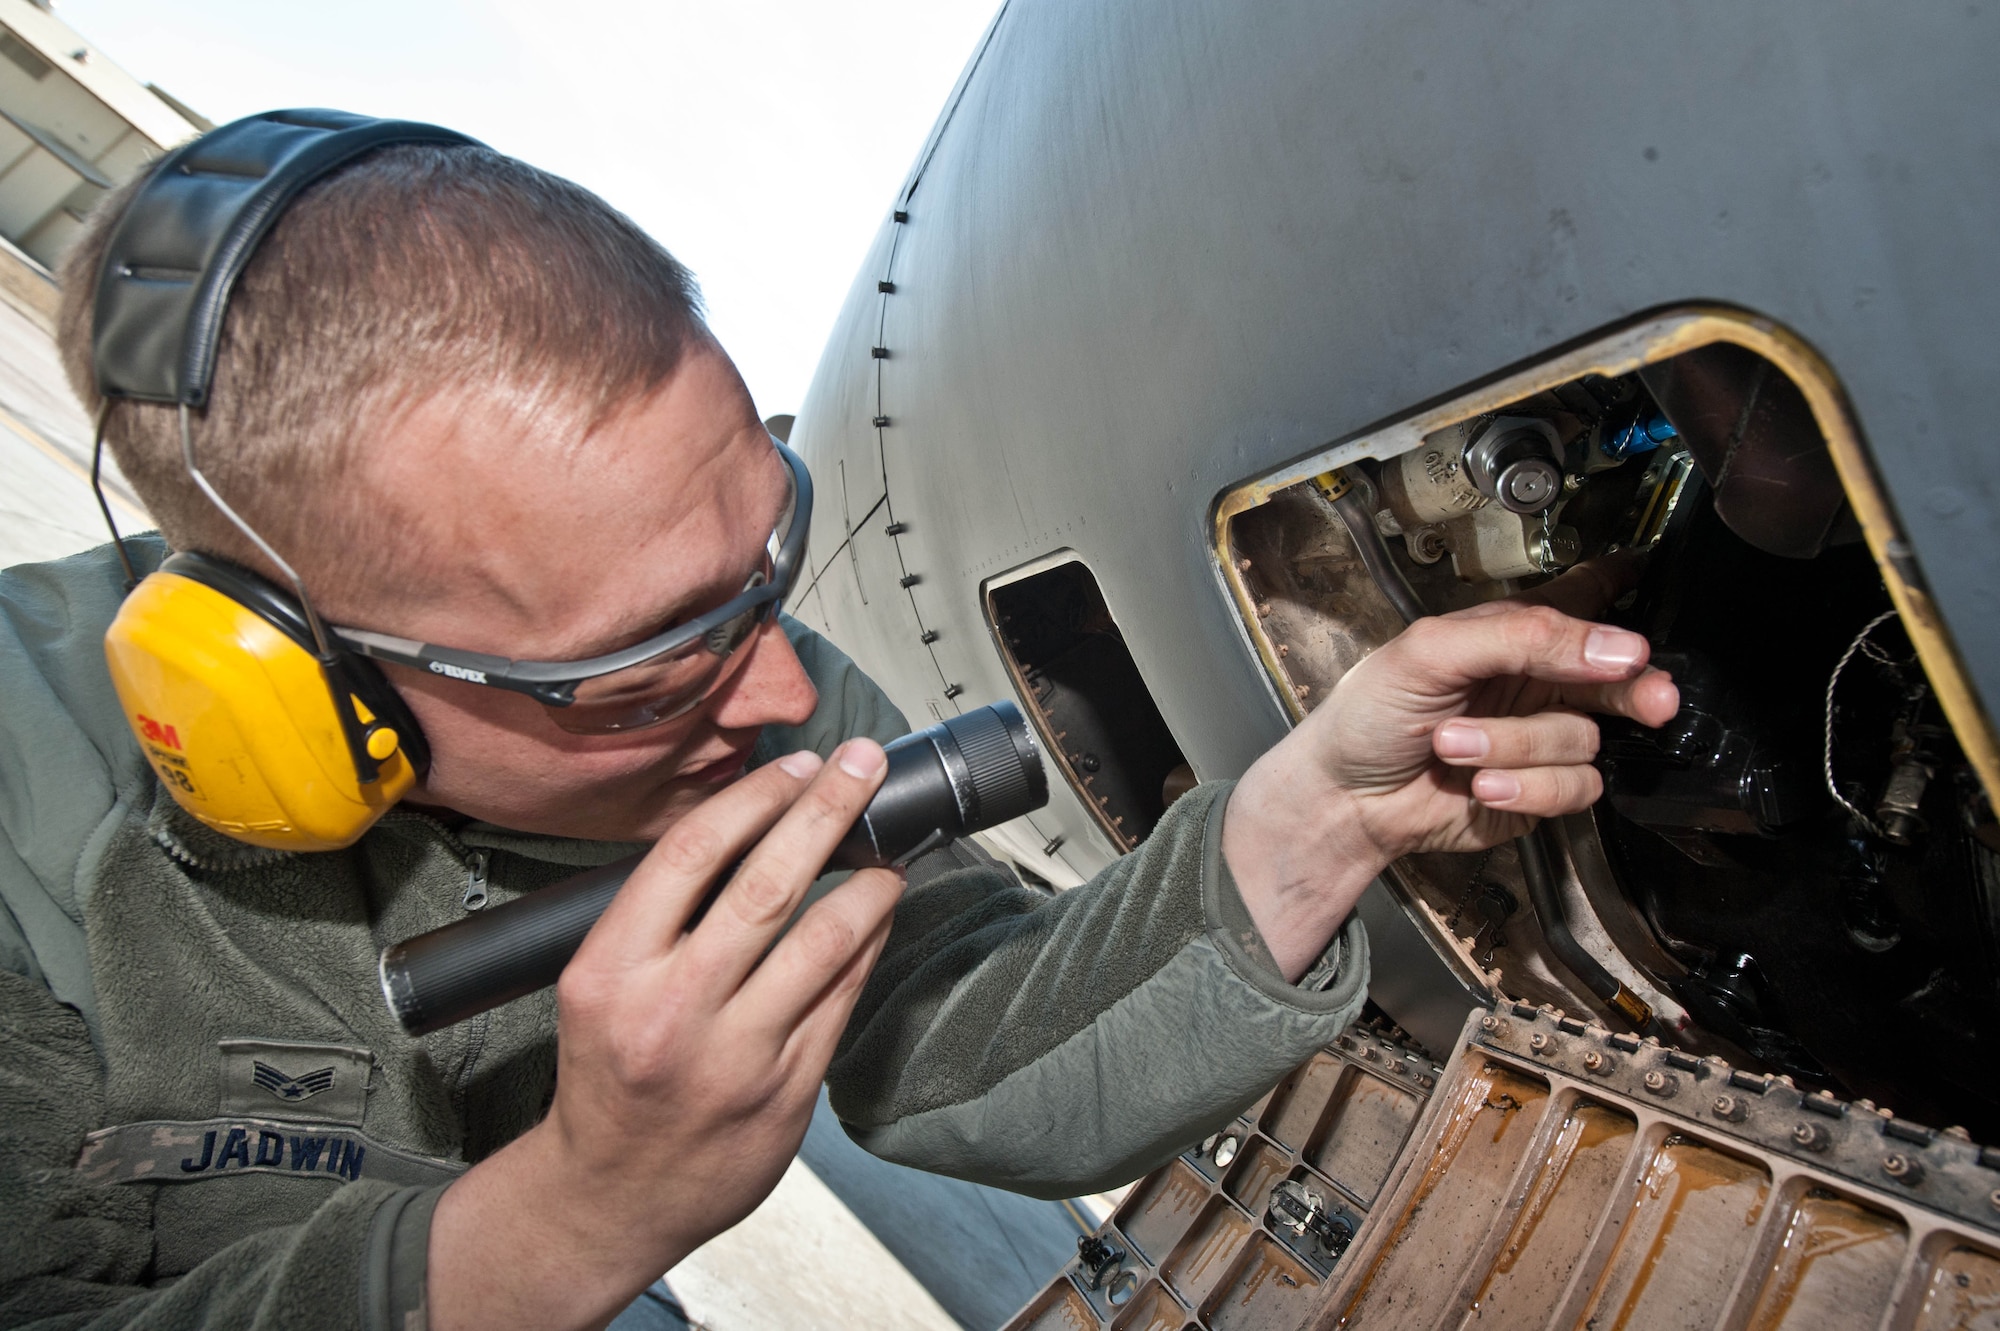 Senior Airman Brandon Jadwin, 28th Aircraft Maintenance Squadron electrical and environmental technician, checks the inside of an access panel to inspect an integrated drive generator system on a B-1 bomber at Ellsworth Air Force Base, S.D., April 4, 2013. Electrical and Environmental technicians inspect and evaluate B-1 bombers to determine the operational status of assigned assets. (U.S. Air Force photo by Airman 1st Class Zachary Hada/Released)